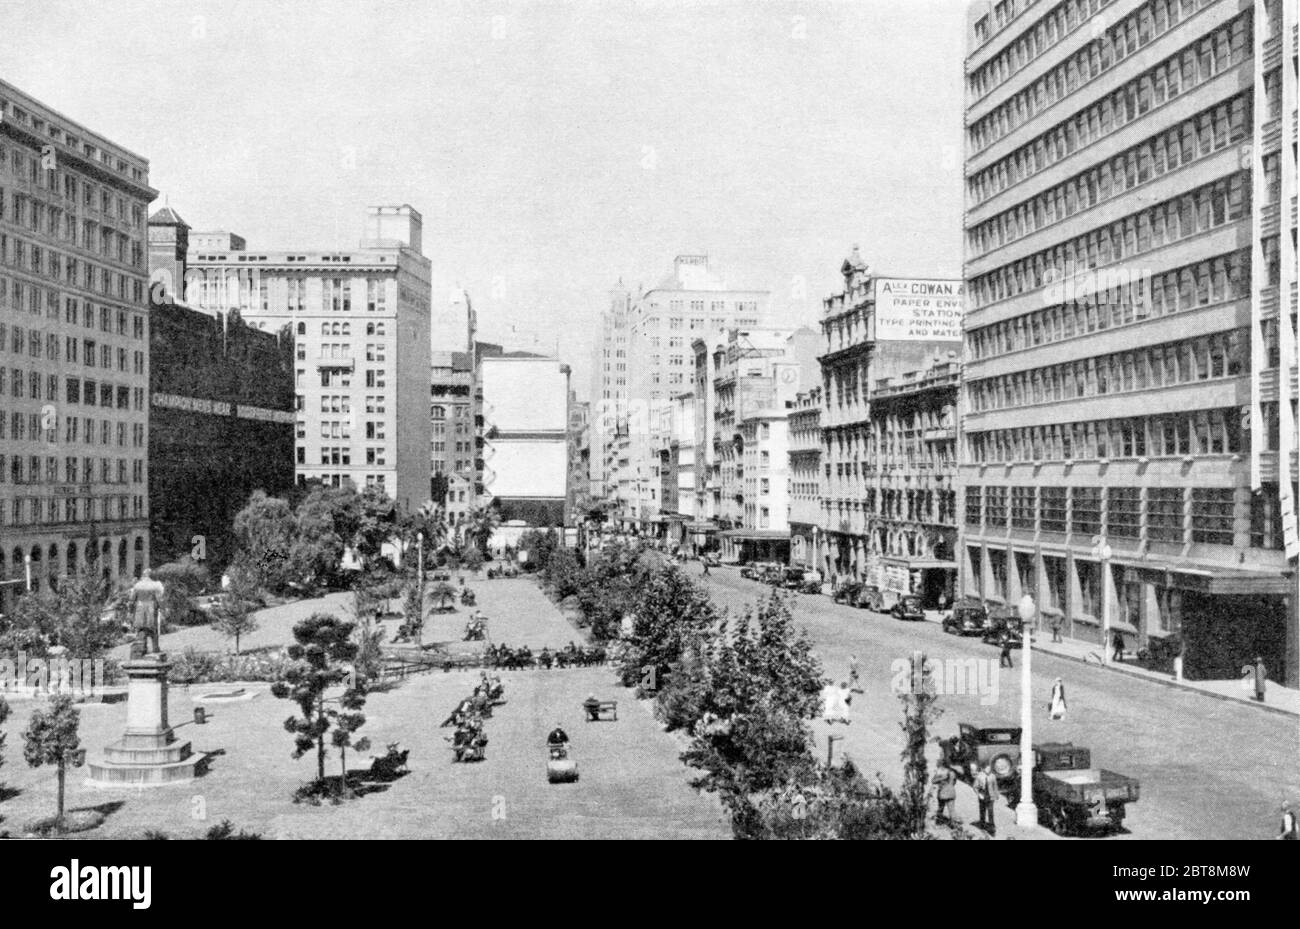 Looking south along York Street, Sydney, Australia in 1938 with Wynyard Square and the statue of John Dunmore Lang, a founder of the Presbyterian Church in Australia, on left and the new multi storey New South Wales Railways building on the right. Much has changed in the 82 years since this image was taken but the railways building is still in use. This image was published in a book by Municipal Council of Sydney to commemorate 'the 150th anniversary of the founding of a nation' Stock Photo